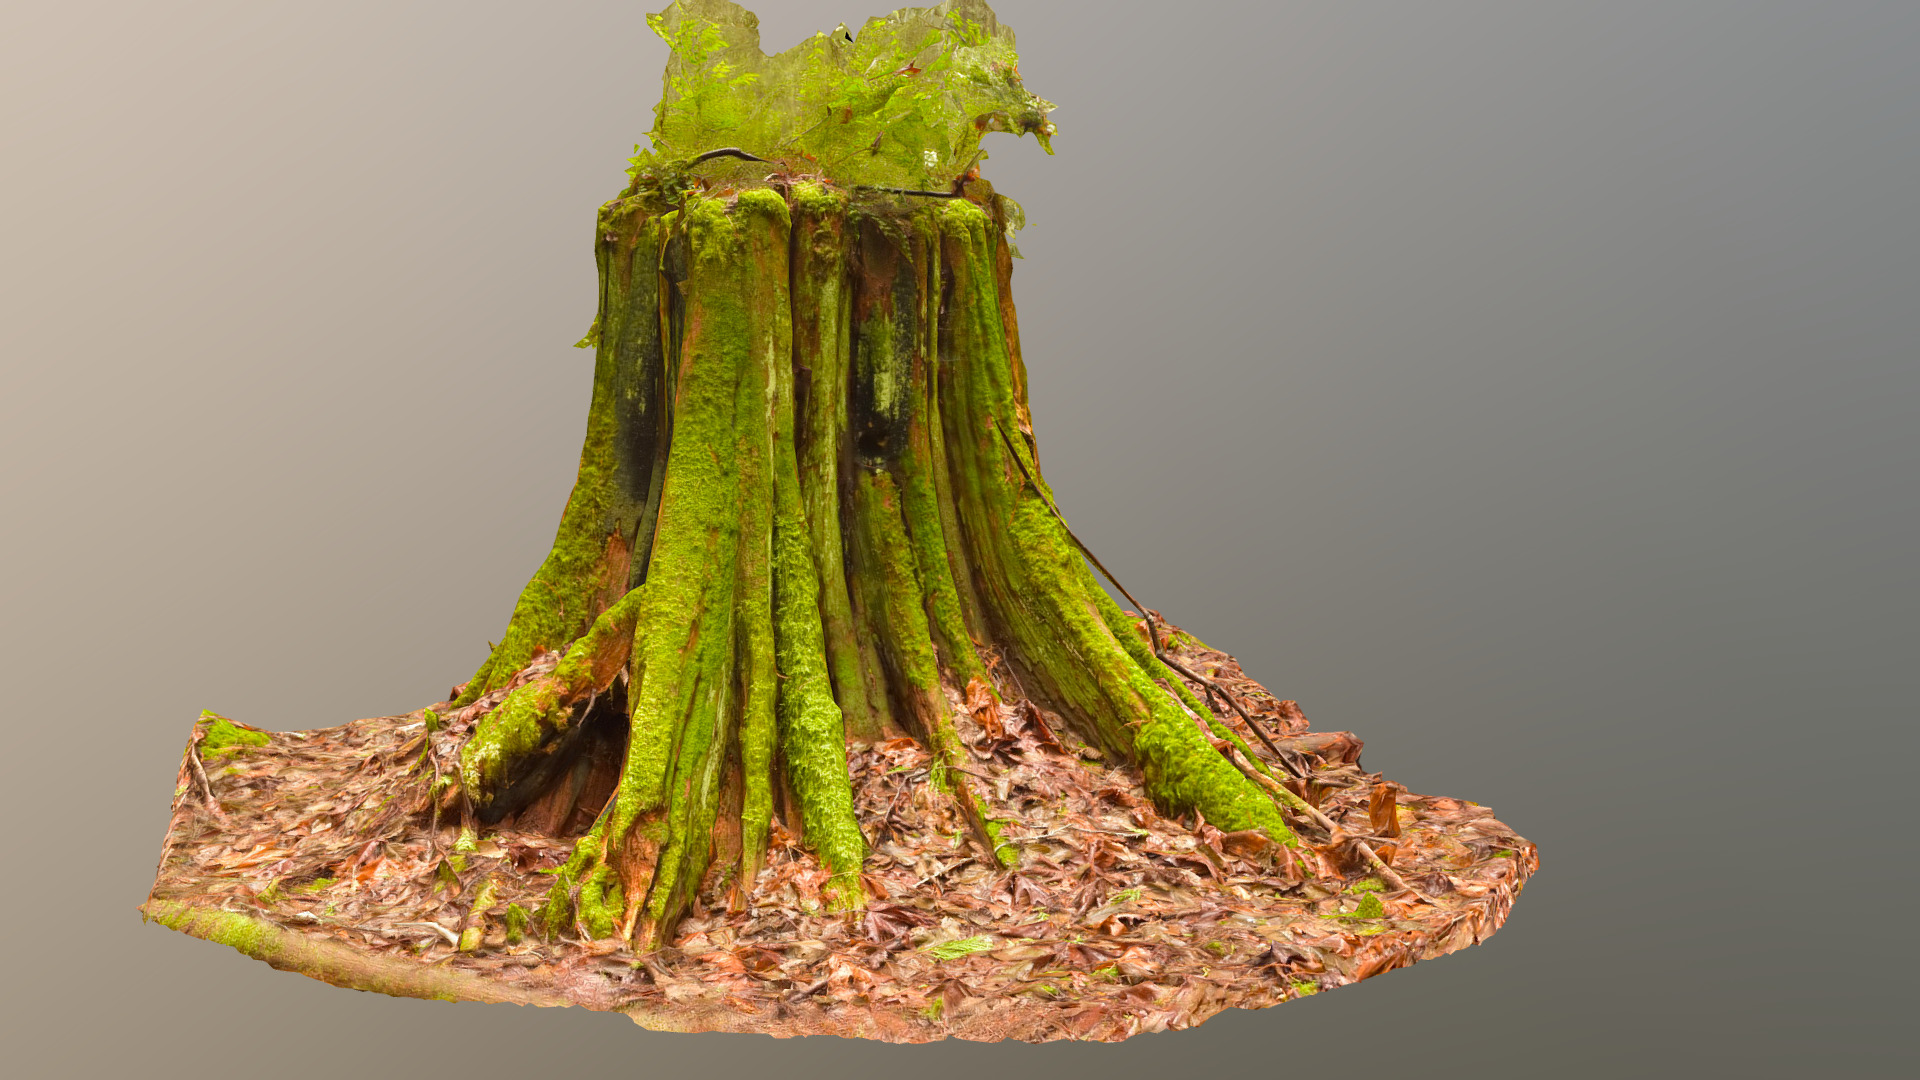 3D model Mossy Stump Low Poly - This is a 3D model of the Mossy Stump Low Poly. The 3D model is about a green cactus with pointy leaves.